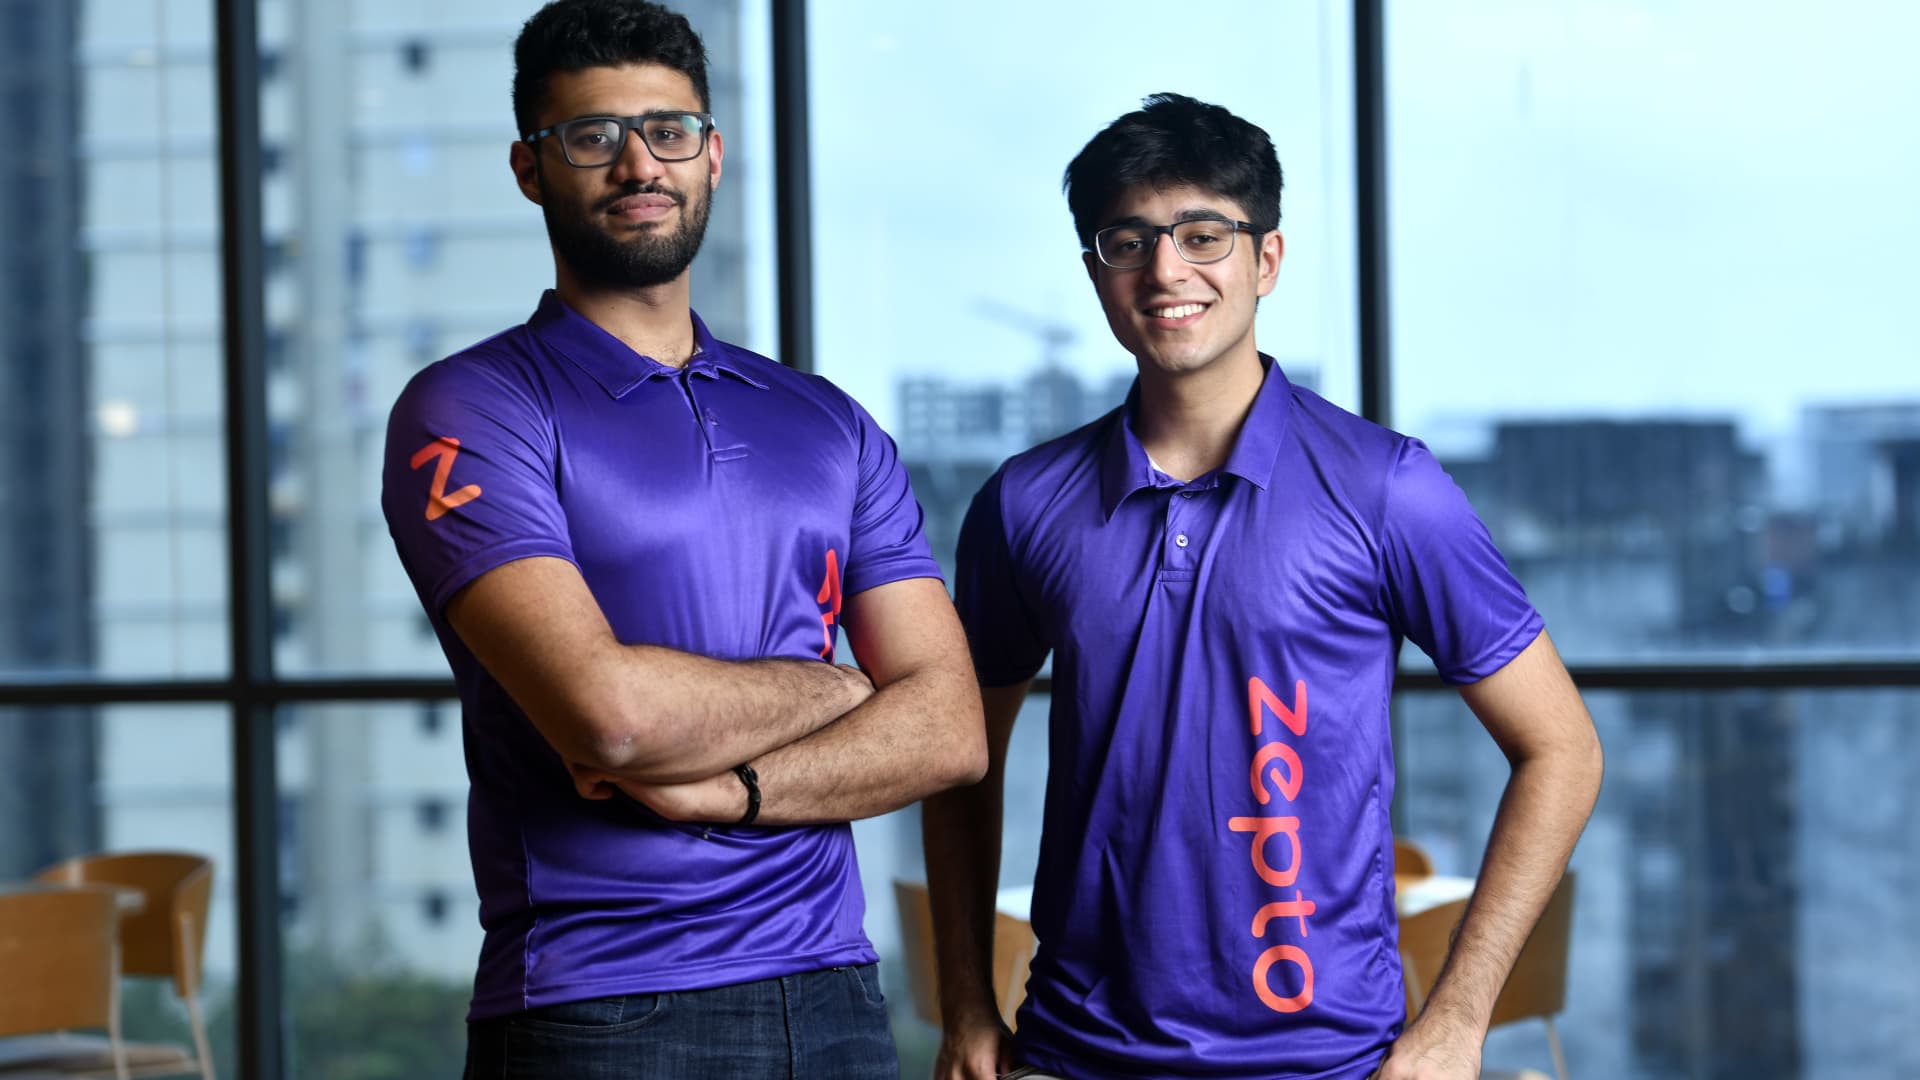 India startup Zepto’s founders share tips on how to build a business